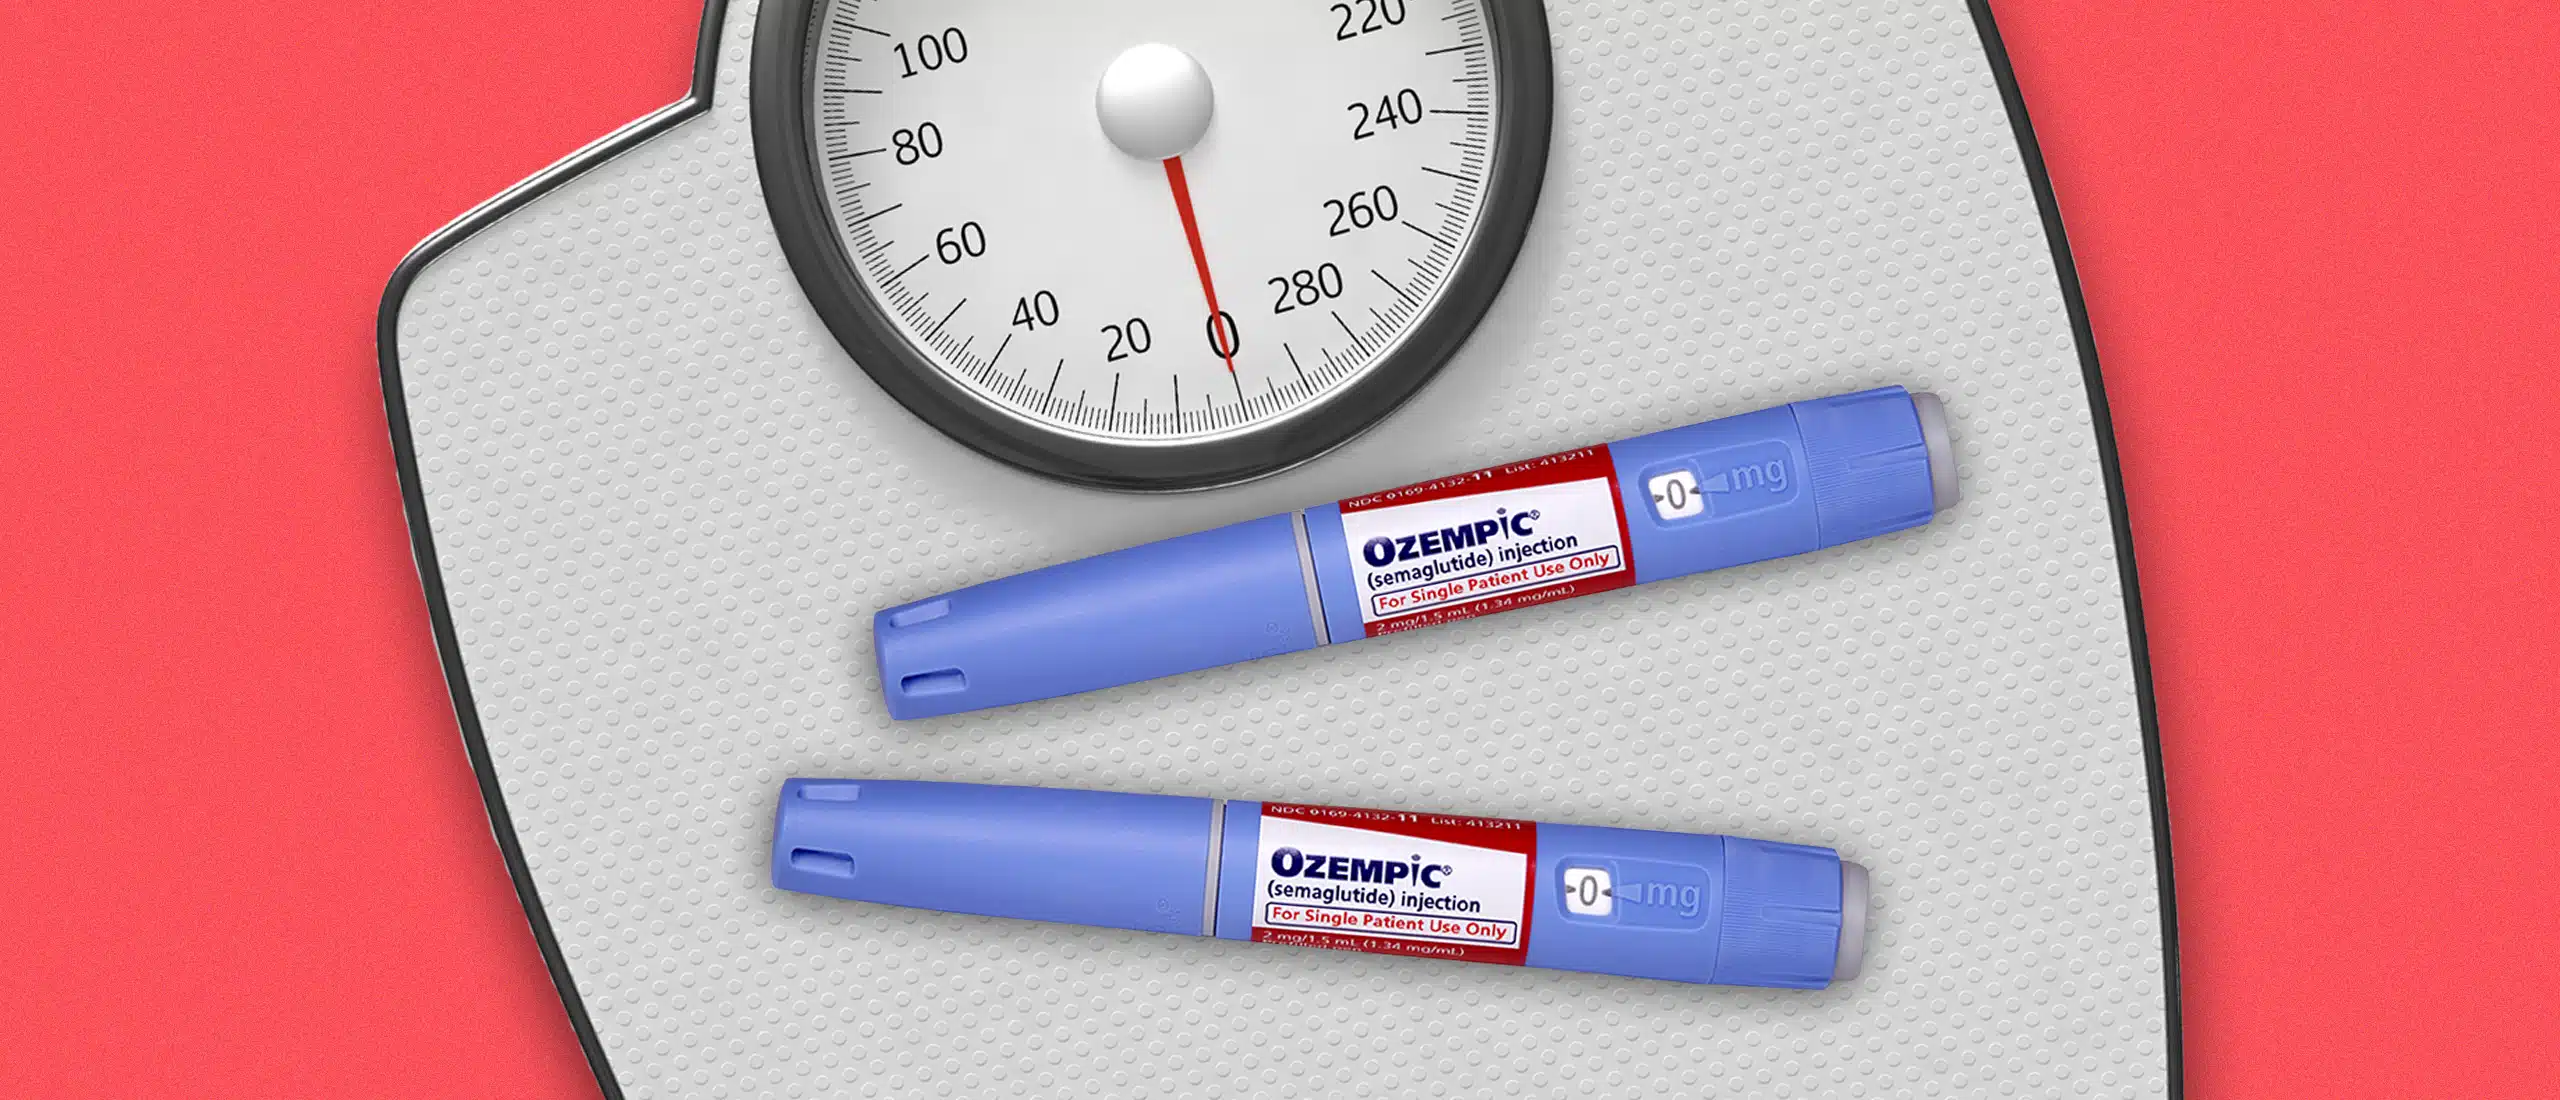 ozempic needles and a scale on a red background